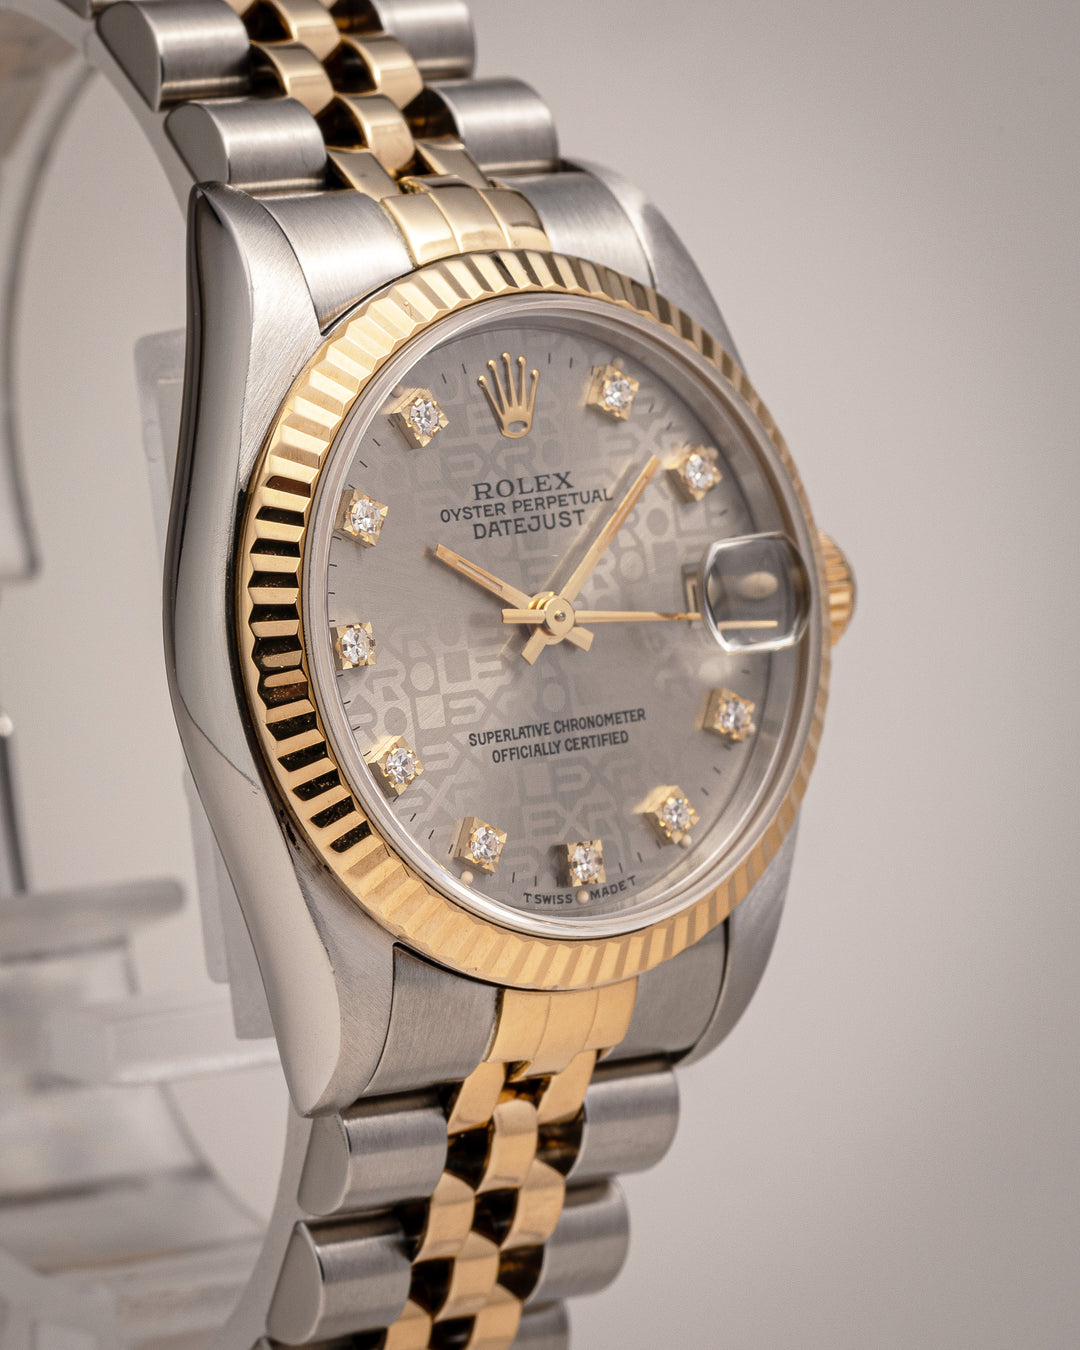 Rolex Stainless Steel and 18k Yellow Gold Datejust (68273)